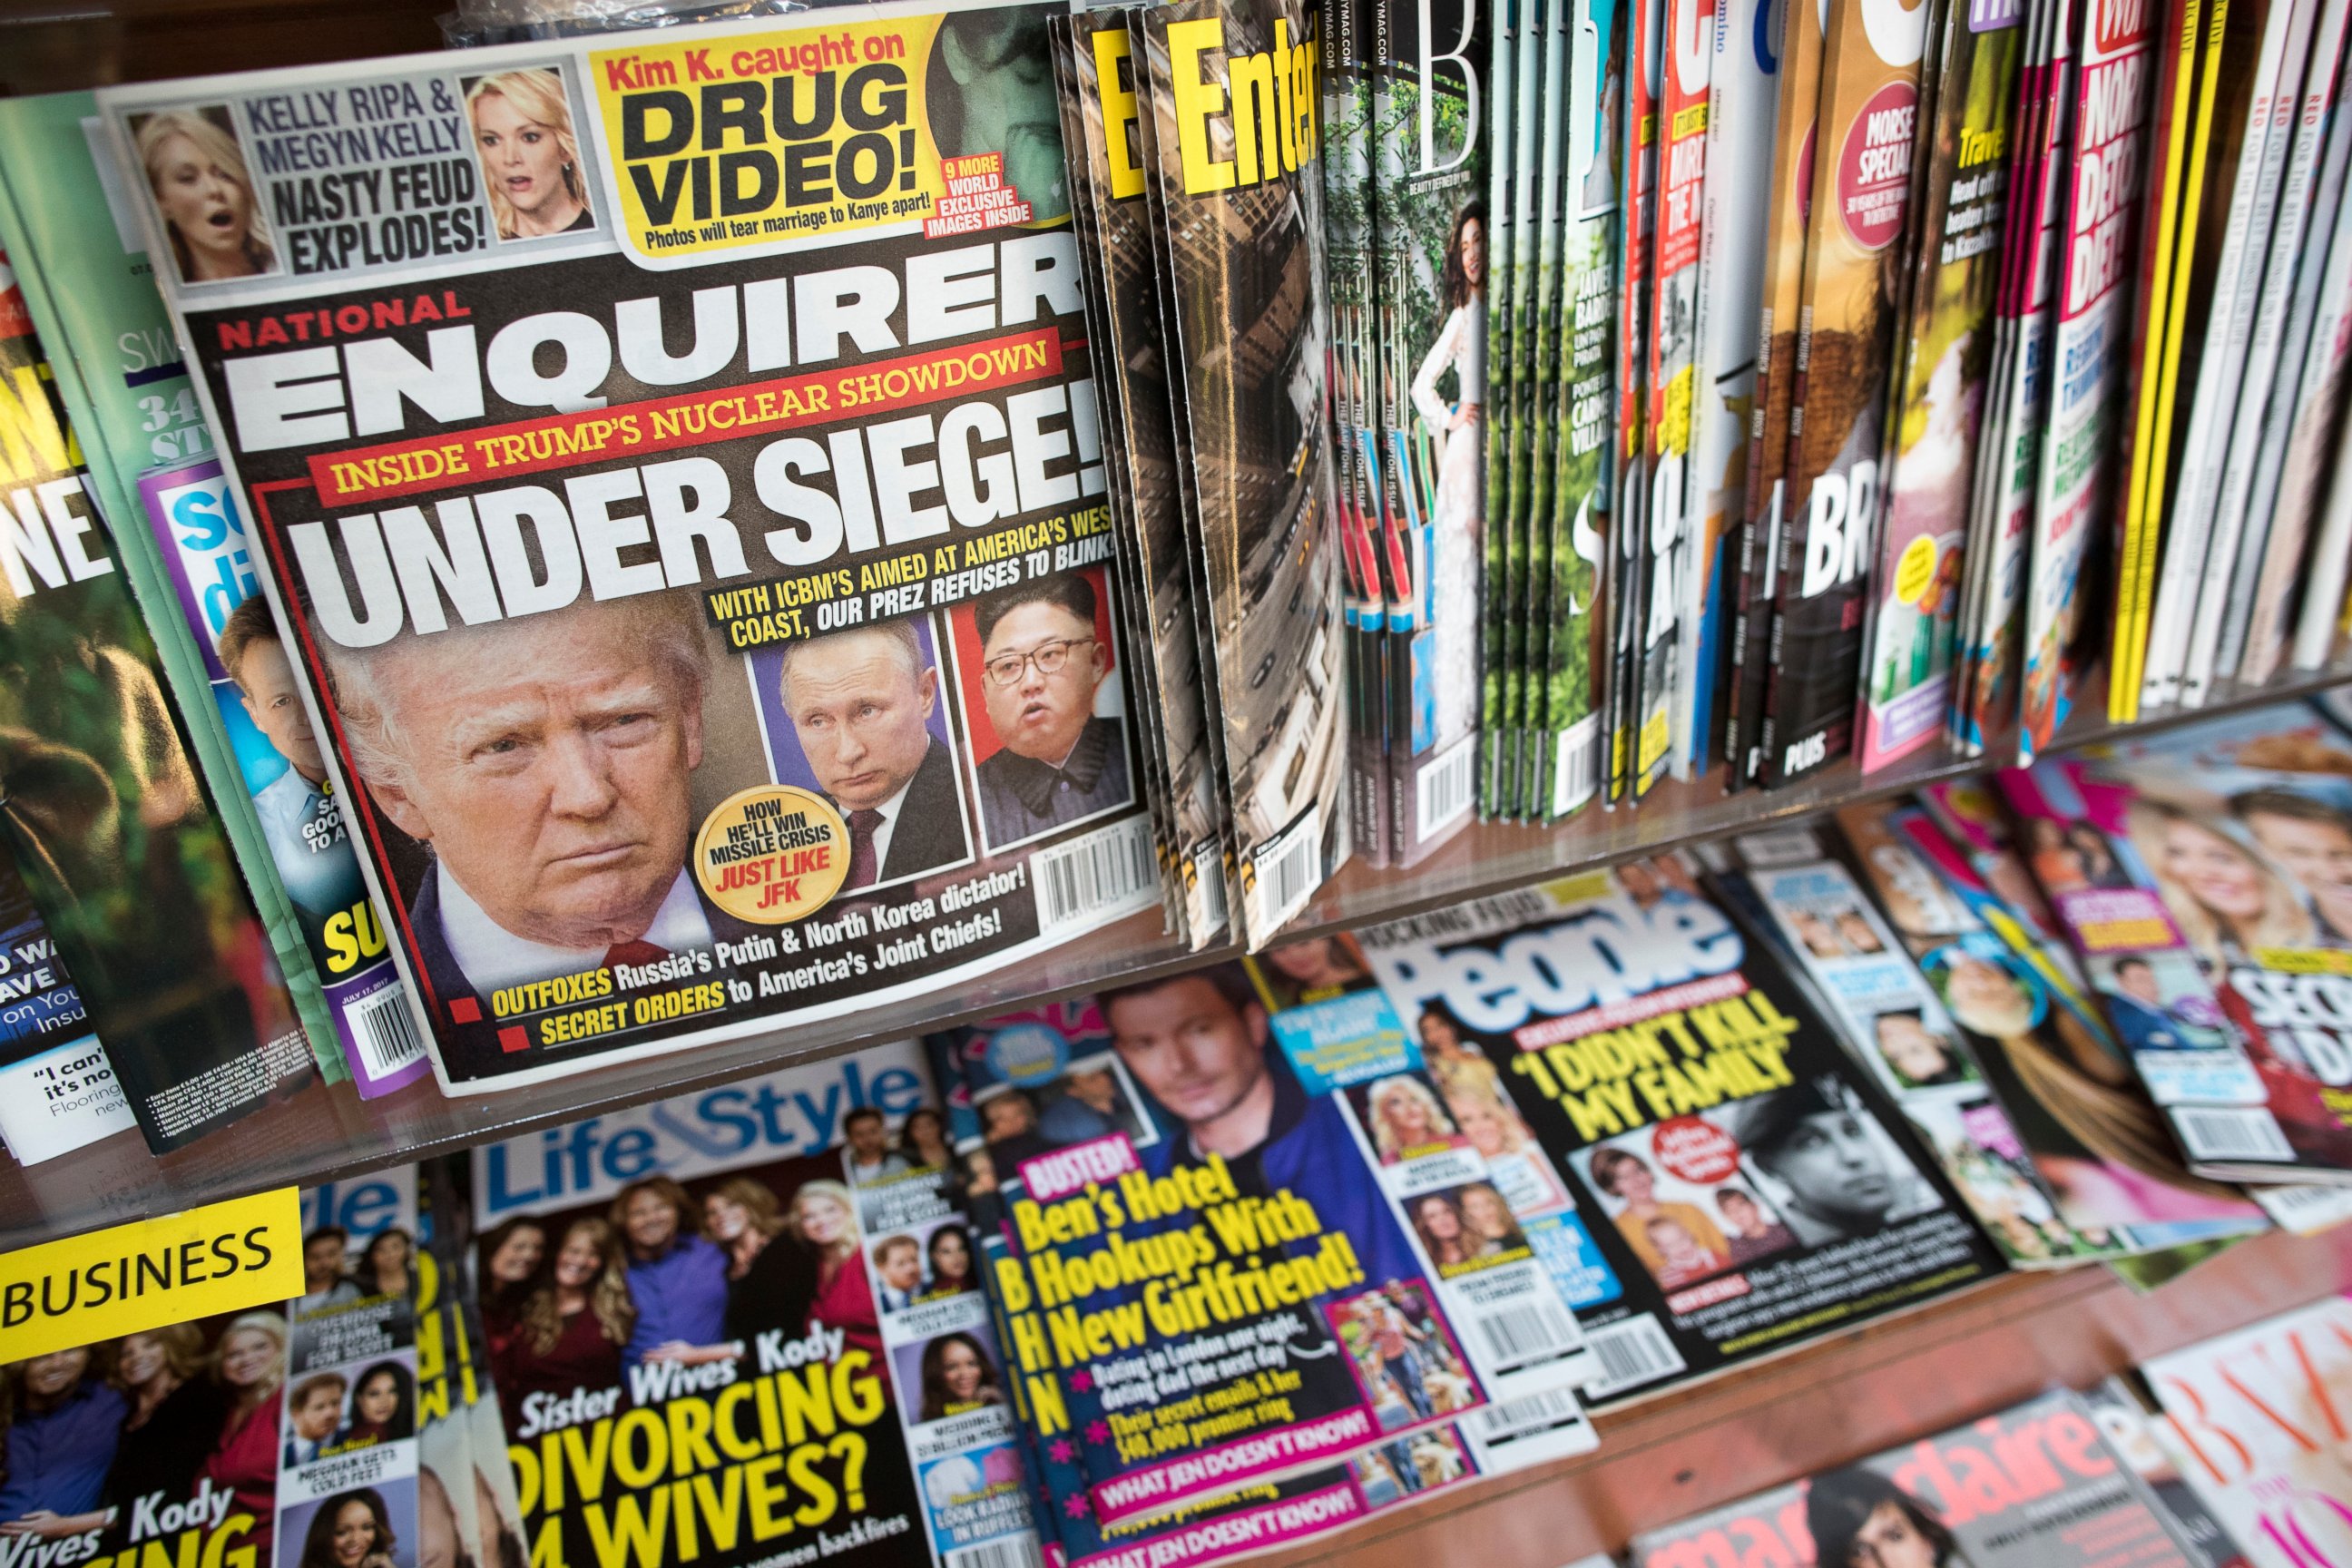 PHOTO: This July 12, 2017 file photo shows an issue of the National Enquirer featuring President Donald Trump on its cover at a store in New York.